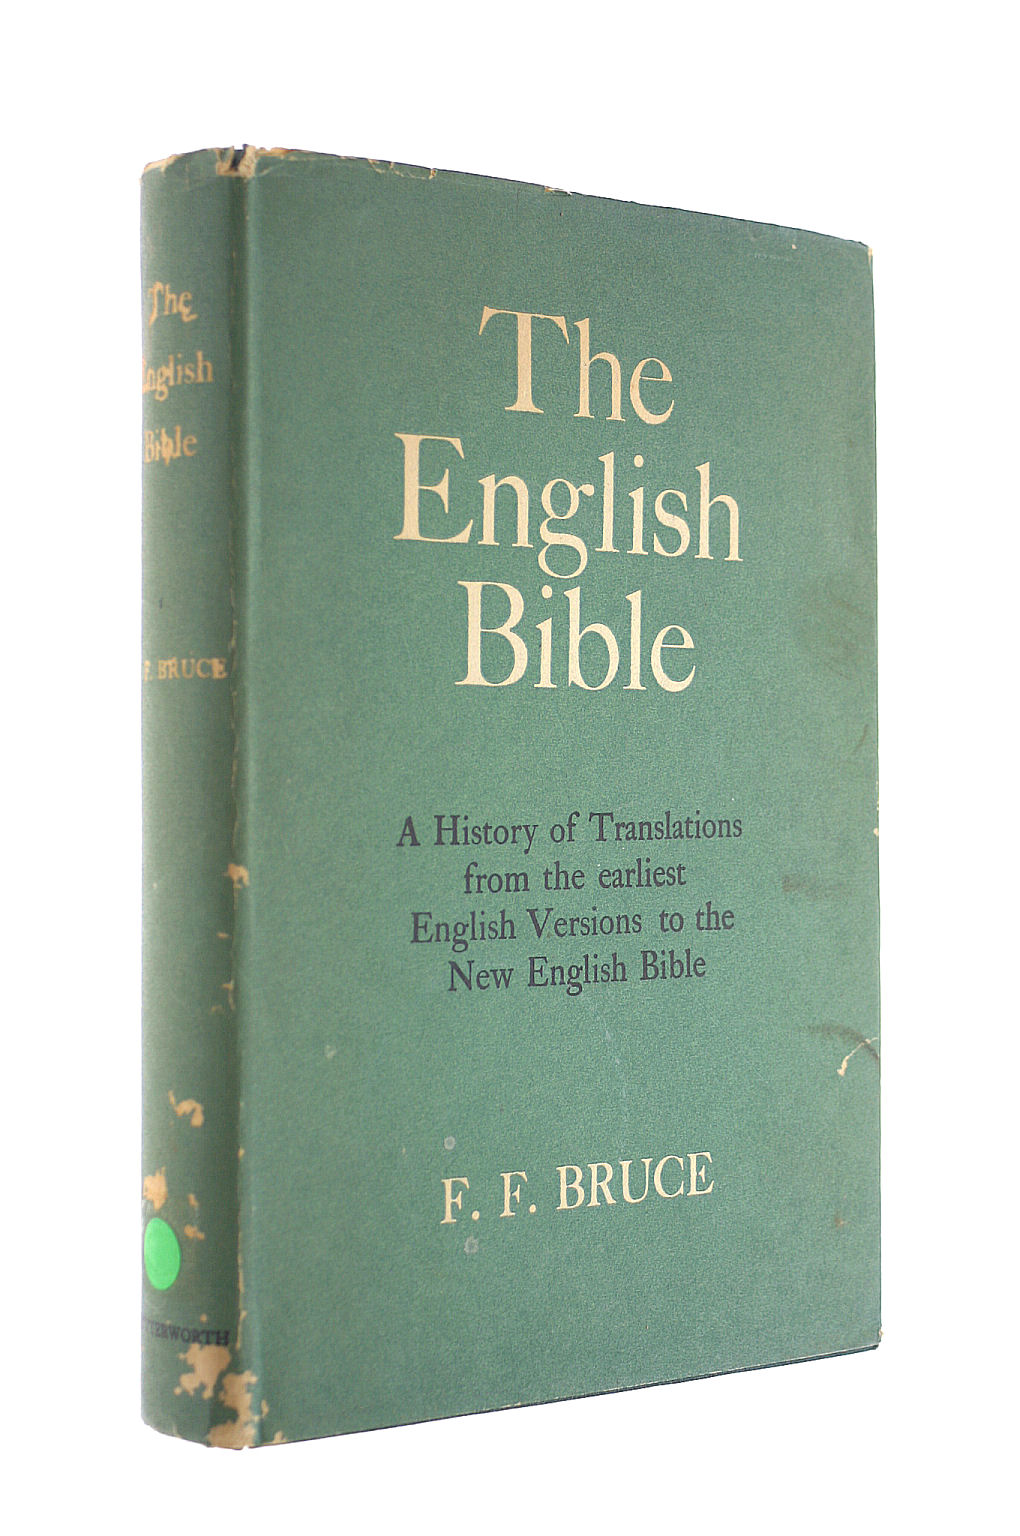 F F BRUCE - The English Bible: A History of Translations from the Earliest English Versions to the New English Bible